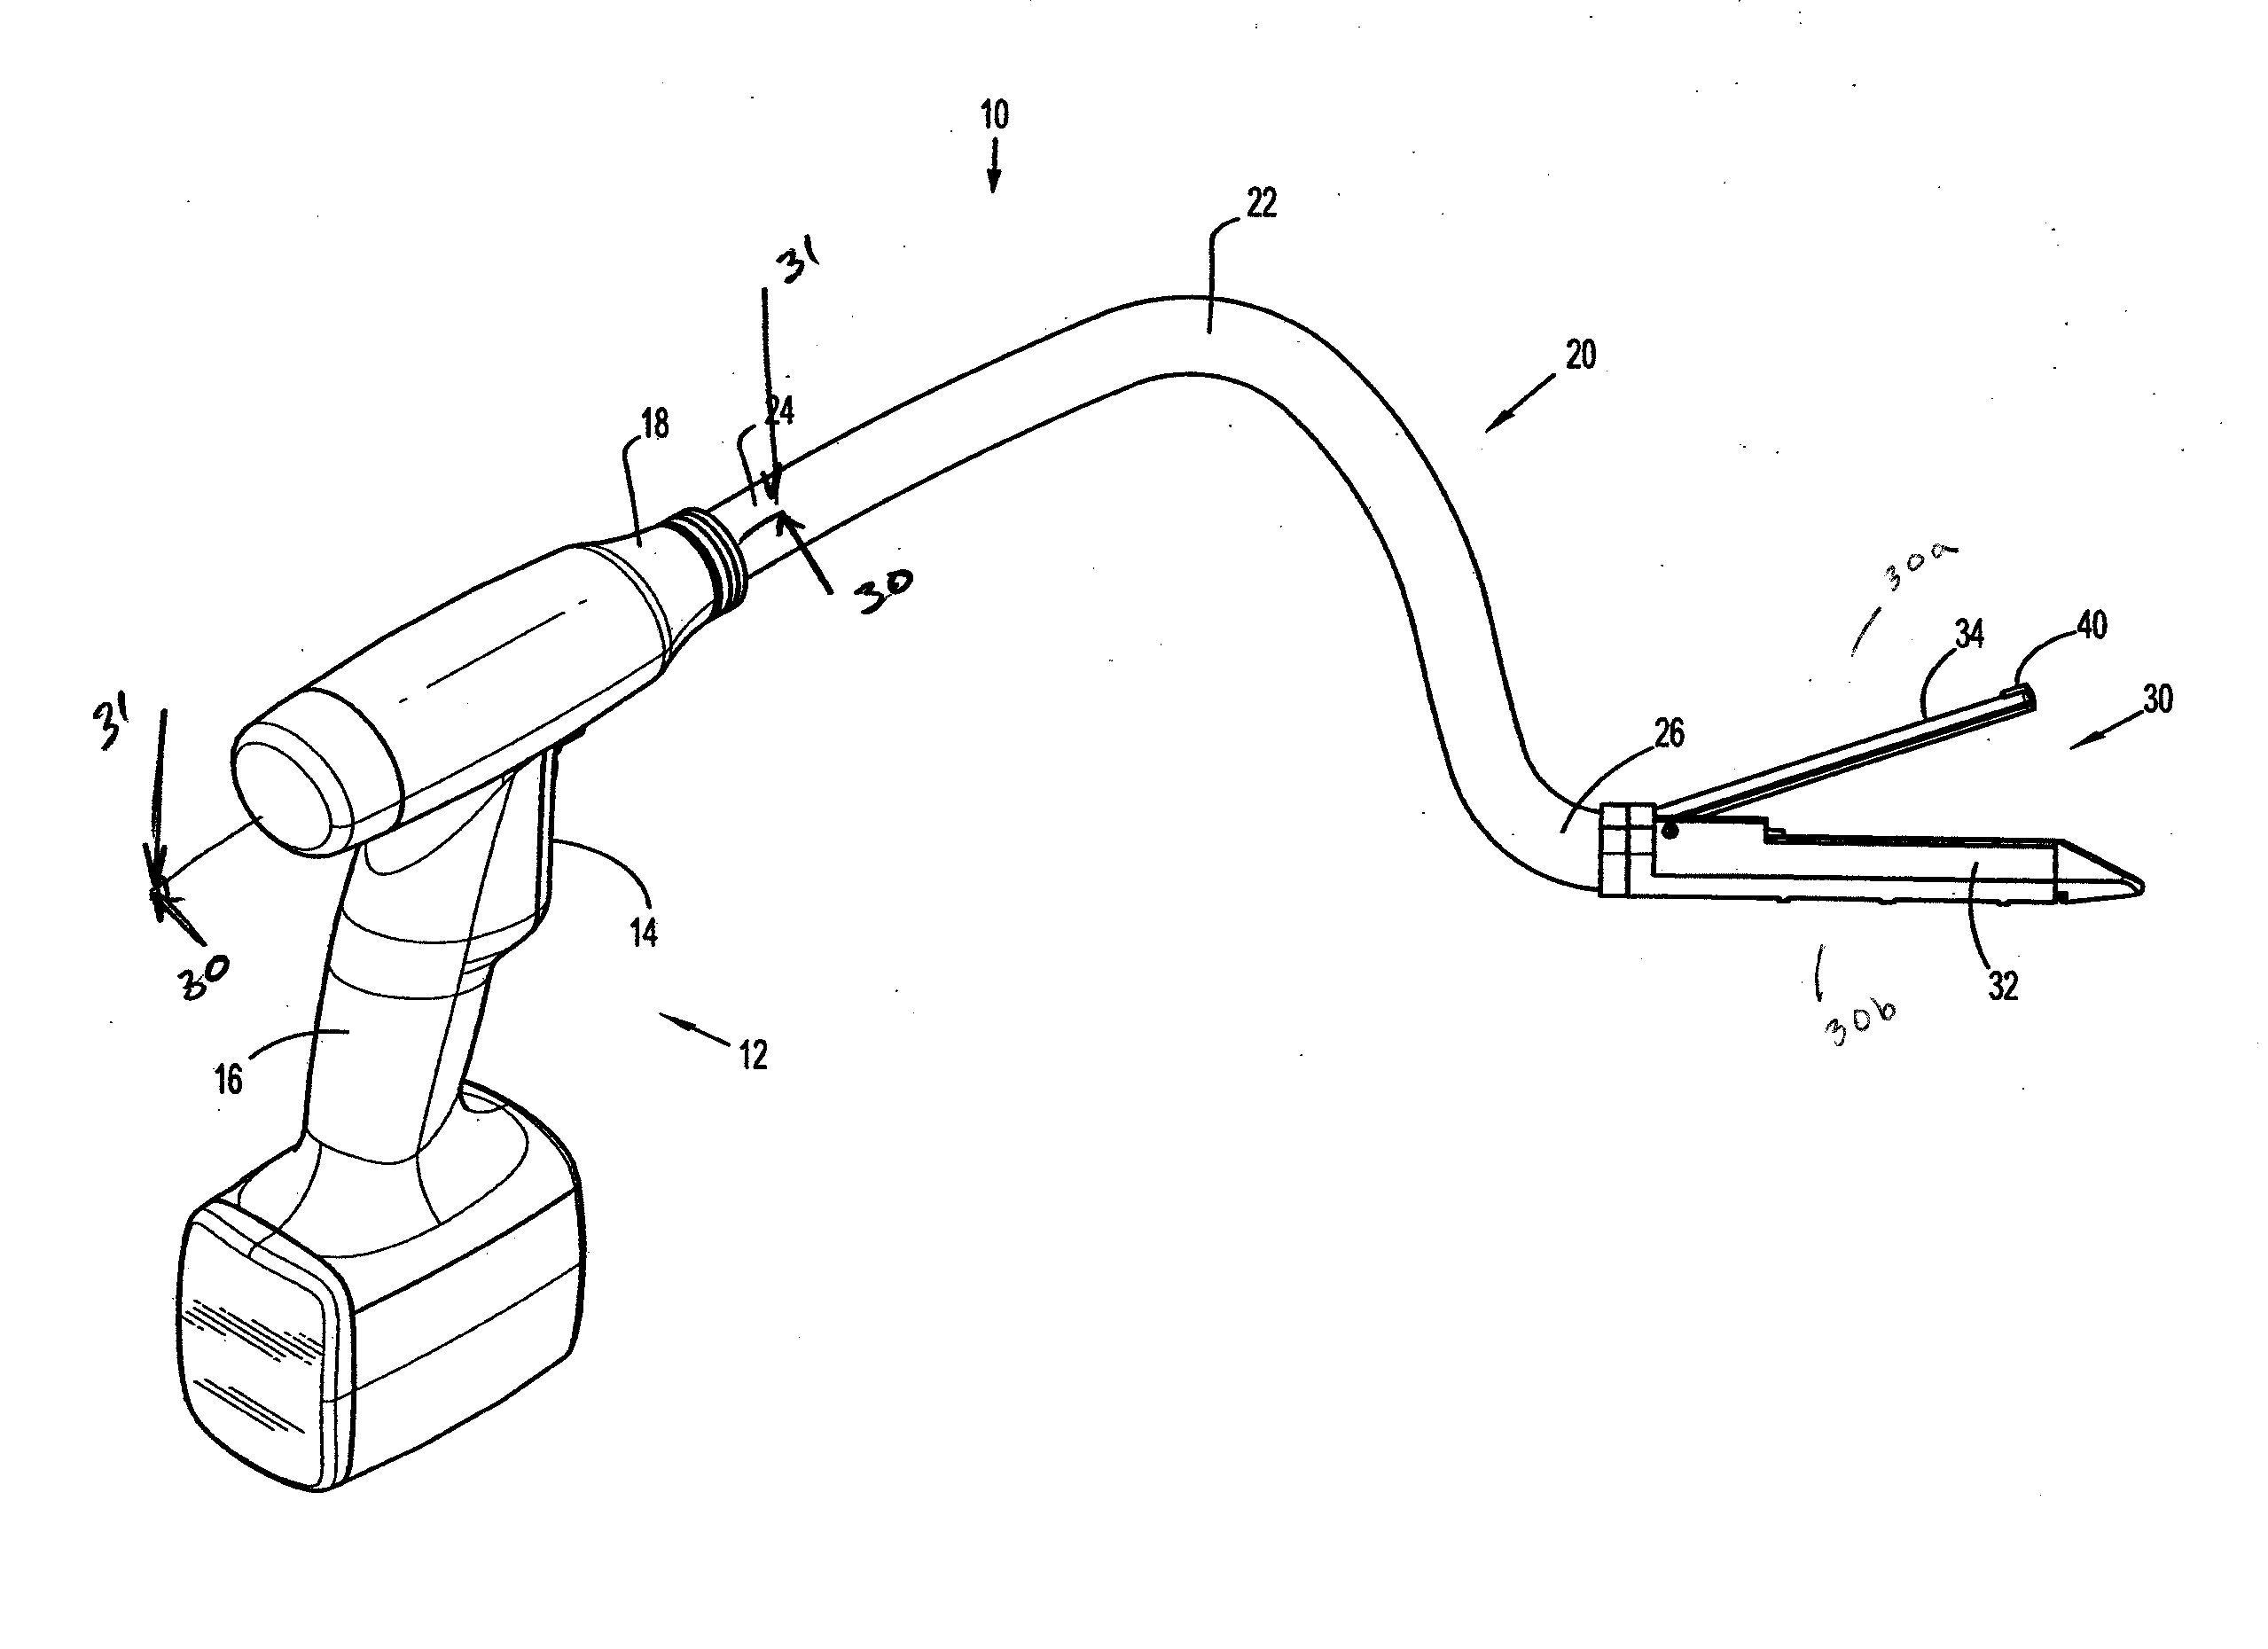 Surgical Apparatus and Method for Endoluminal Surgery